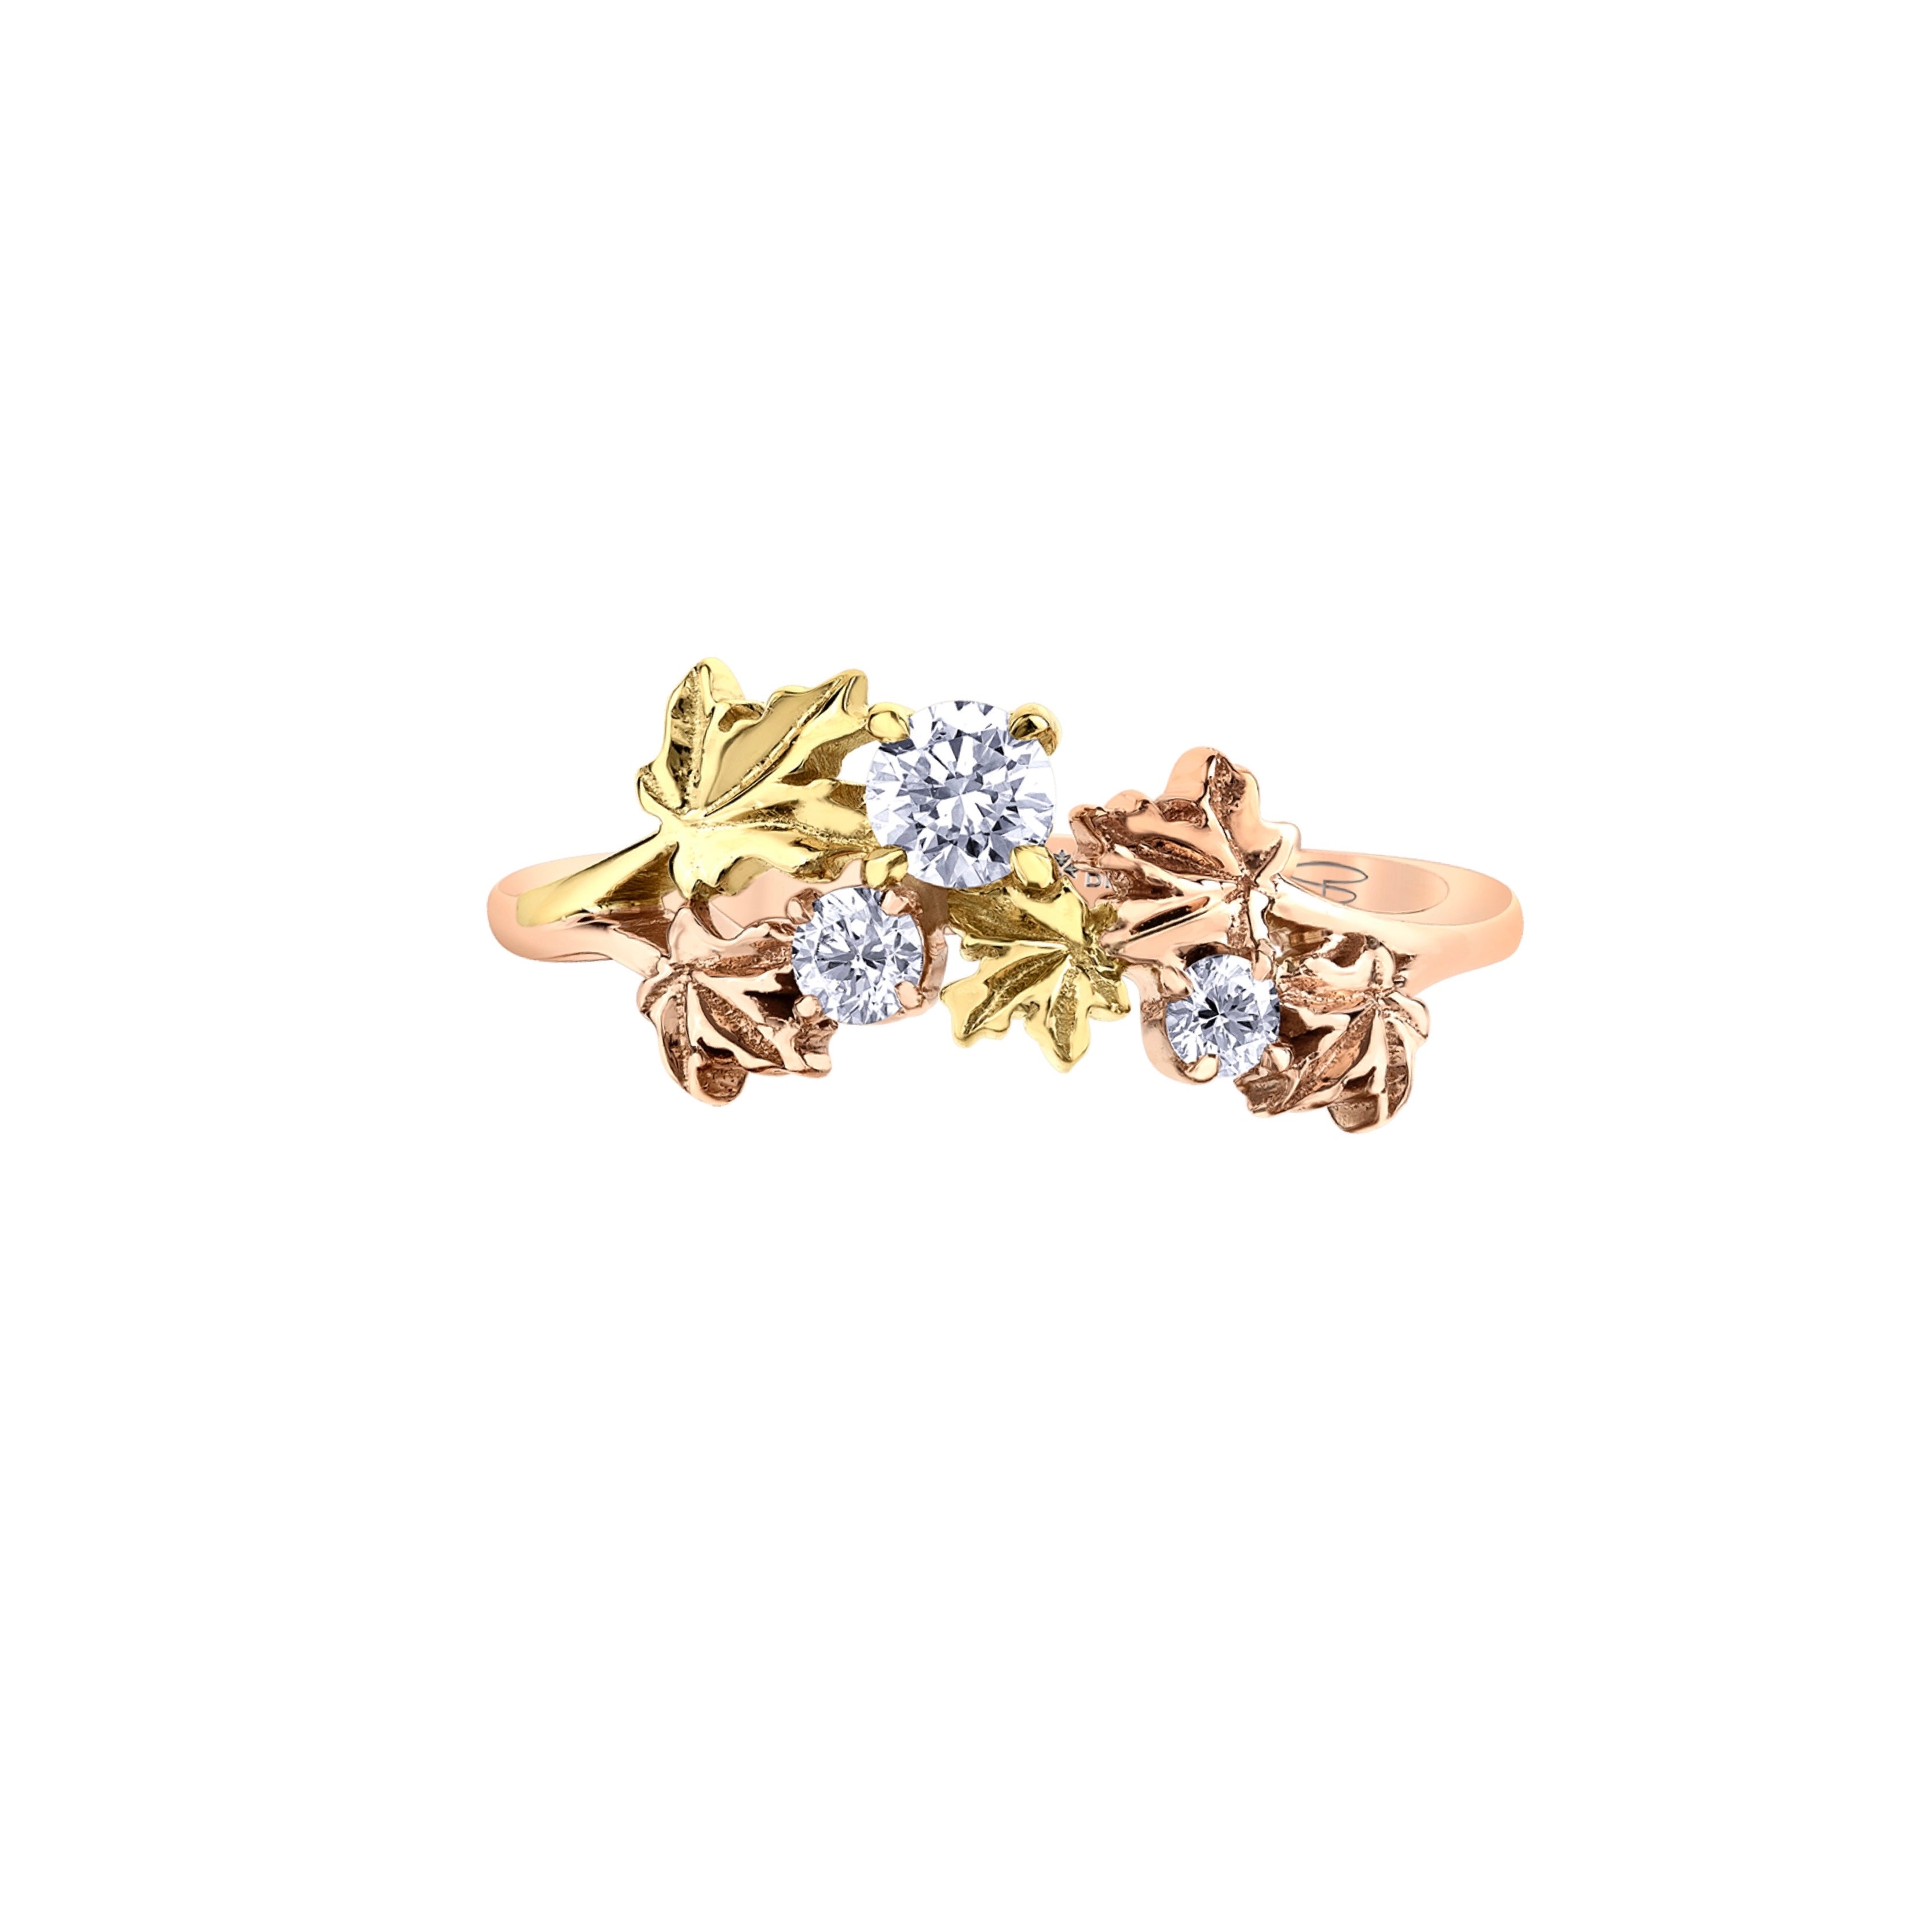 Crafted in 14KT rose and yellow Certified Canadian Gold, this ring features five maple leaves cradling three round brilliant-cut Canadian diamonds.